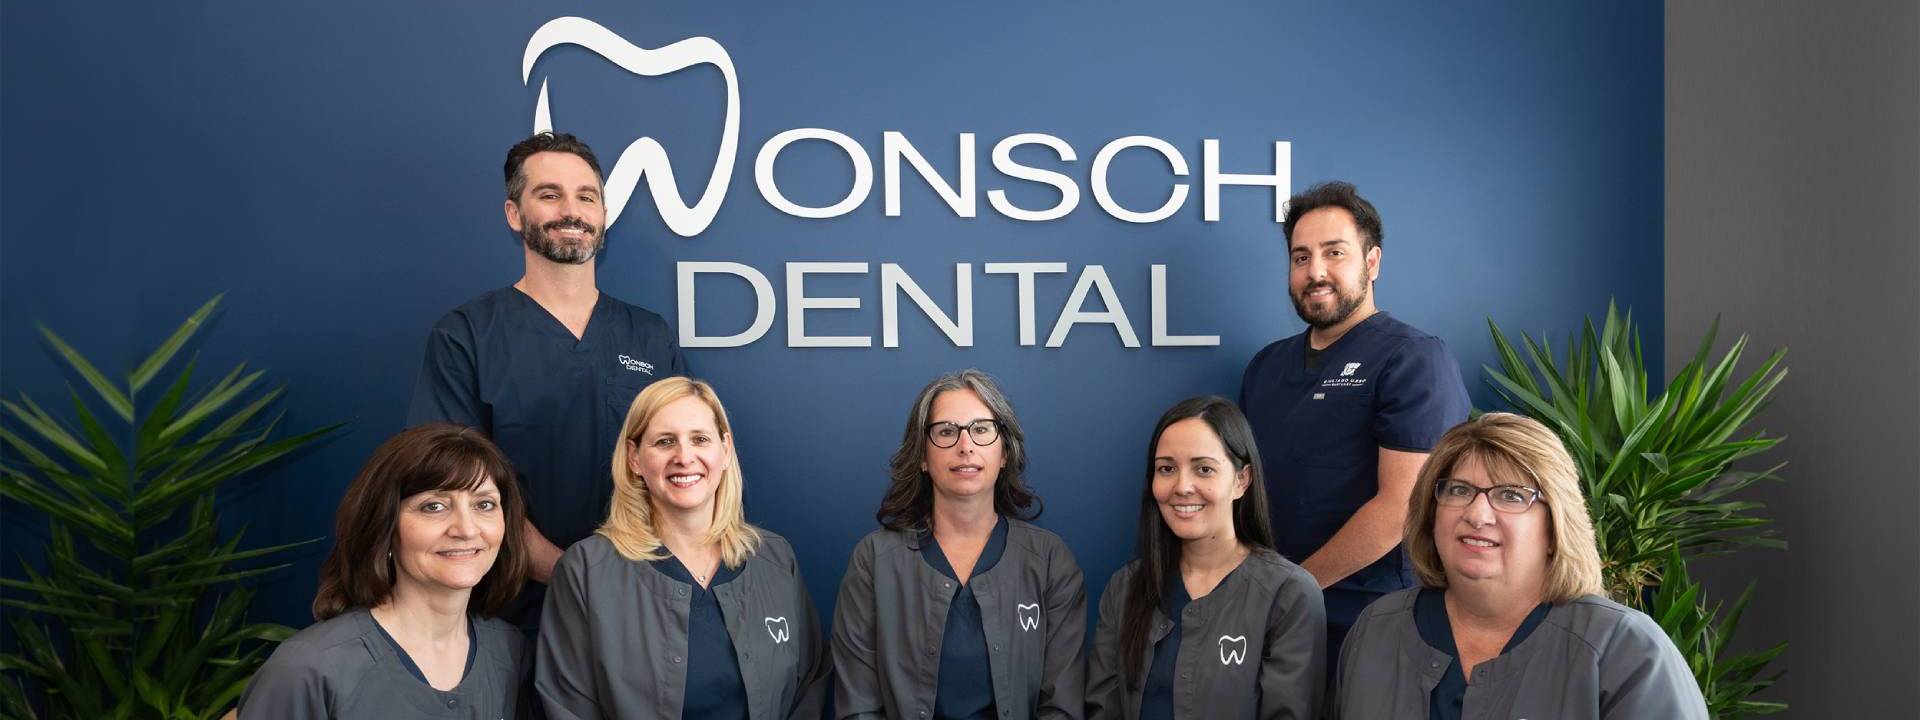 A group of people standing in front of a sign that says wonsch dental.